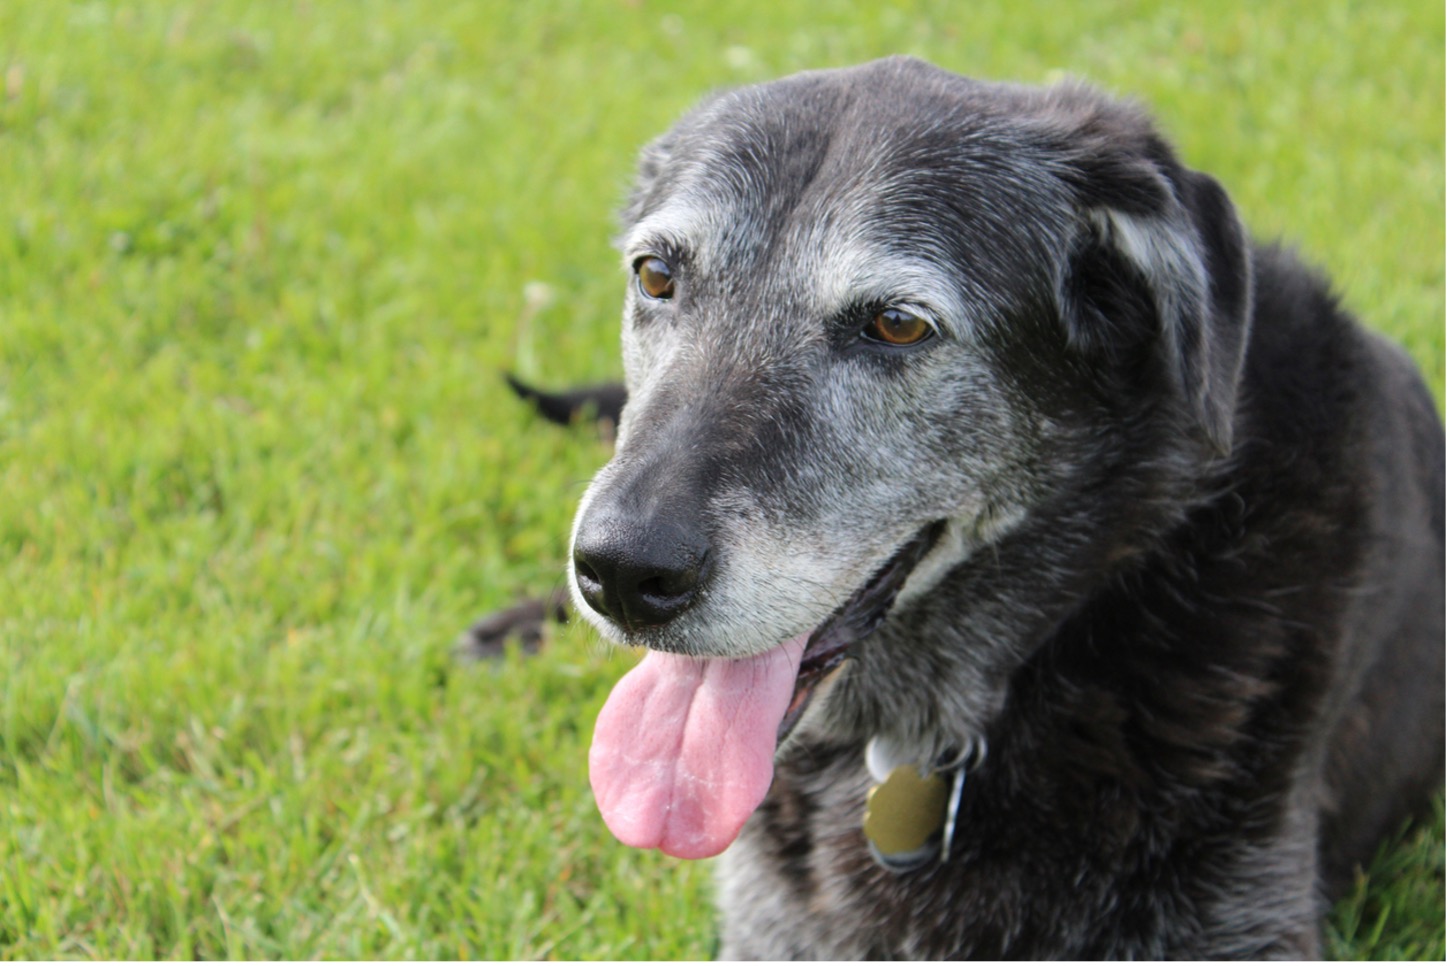 A senior pet dog with its tongue out